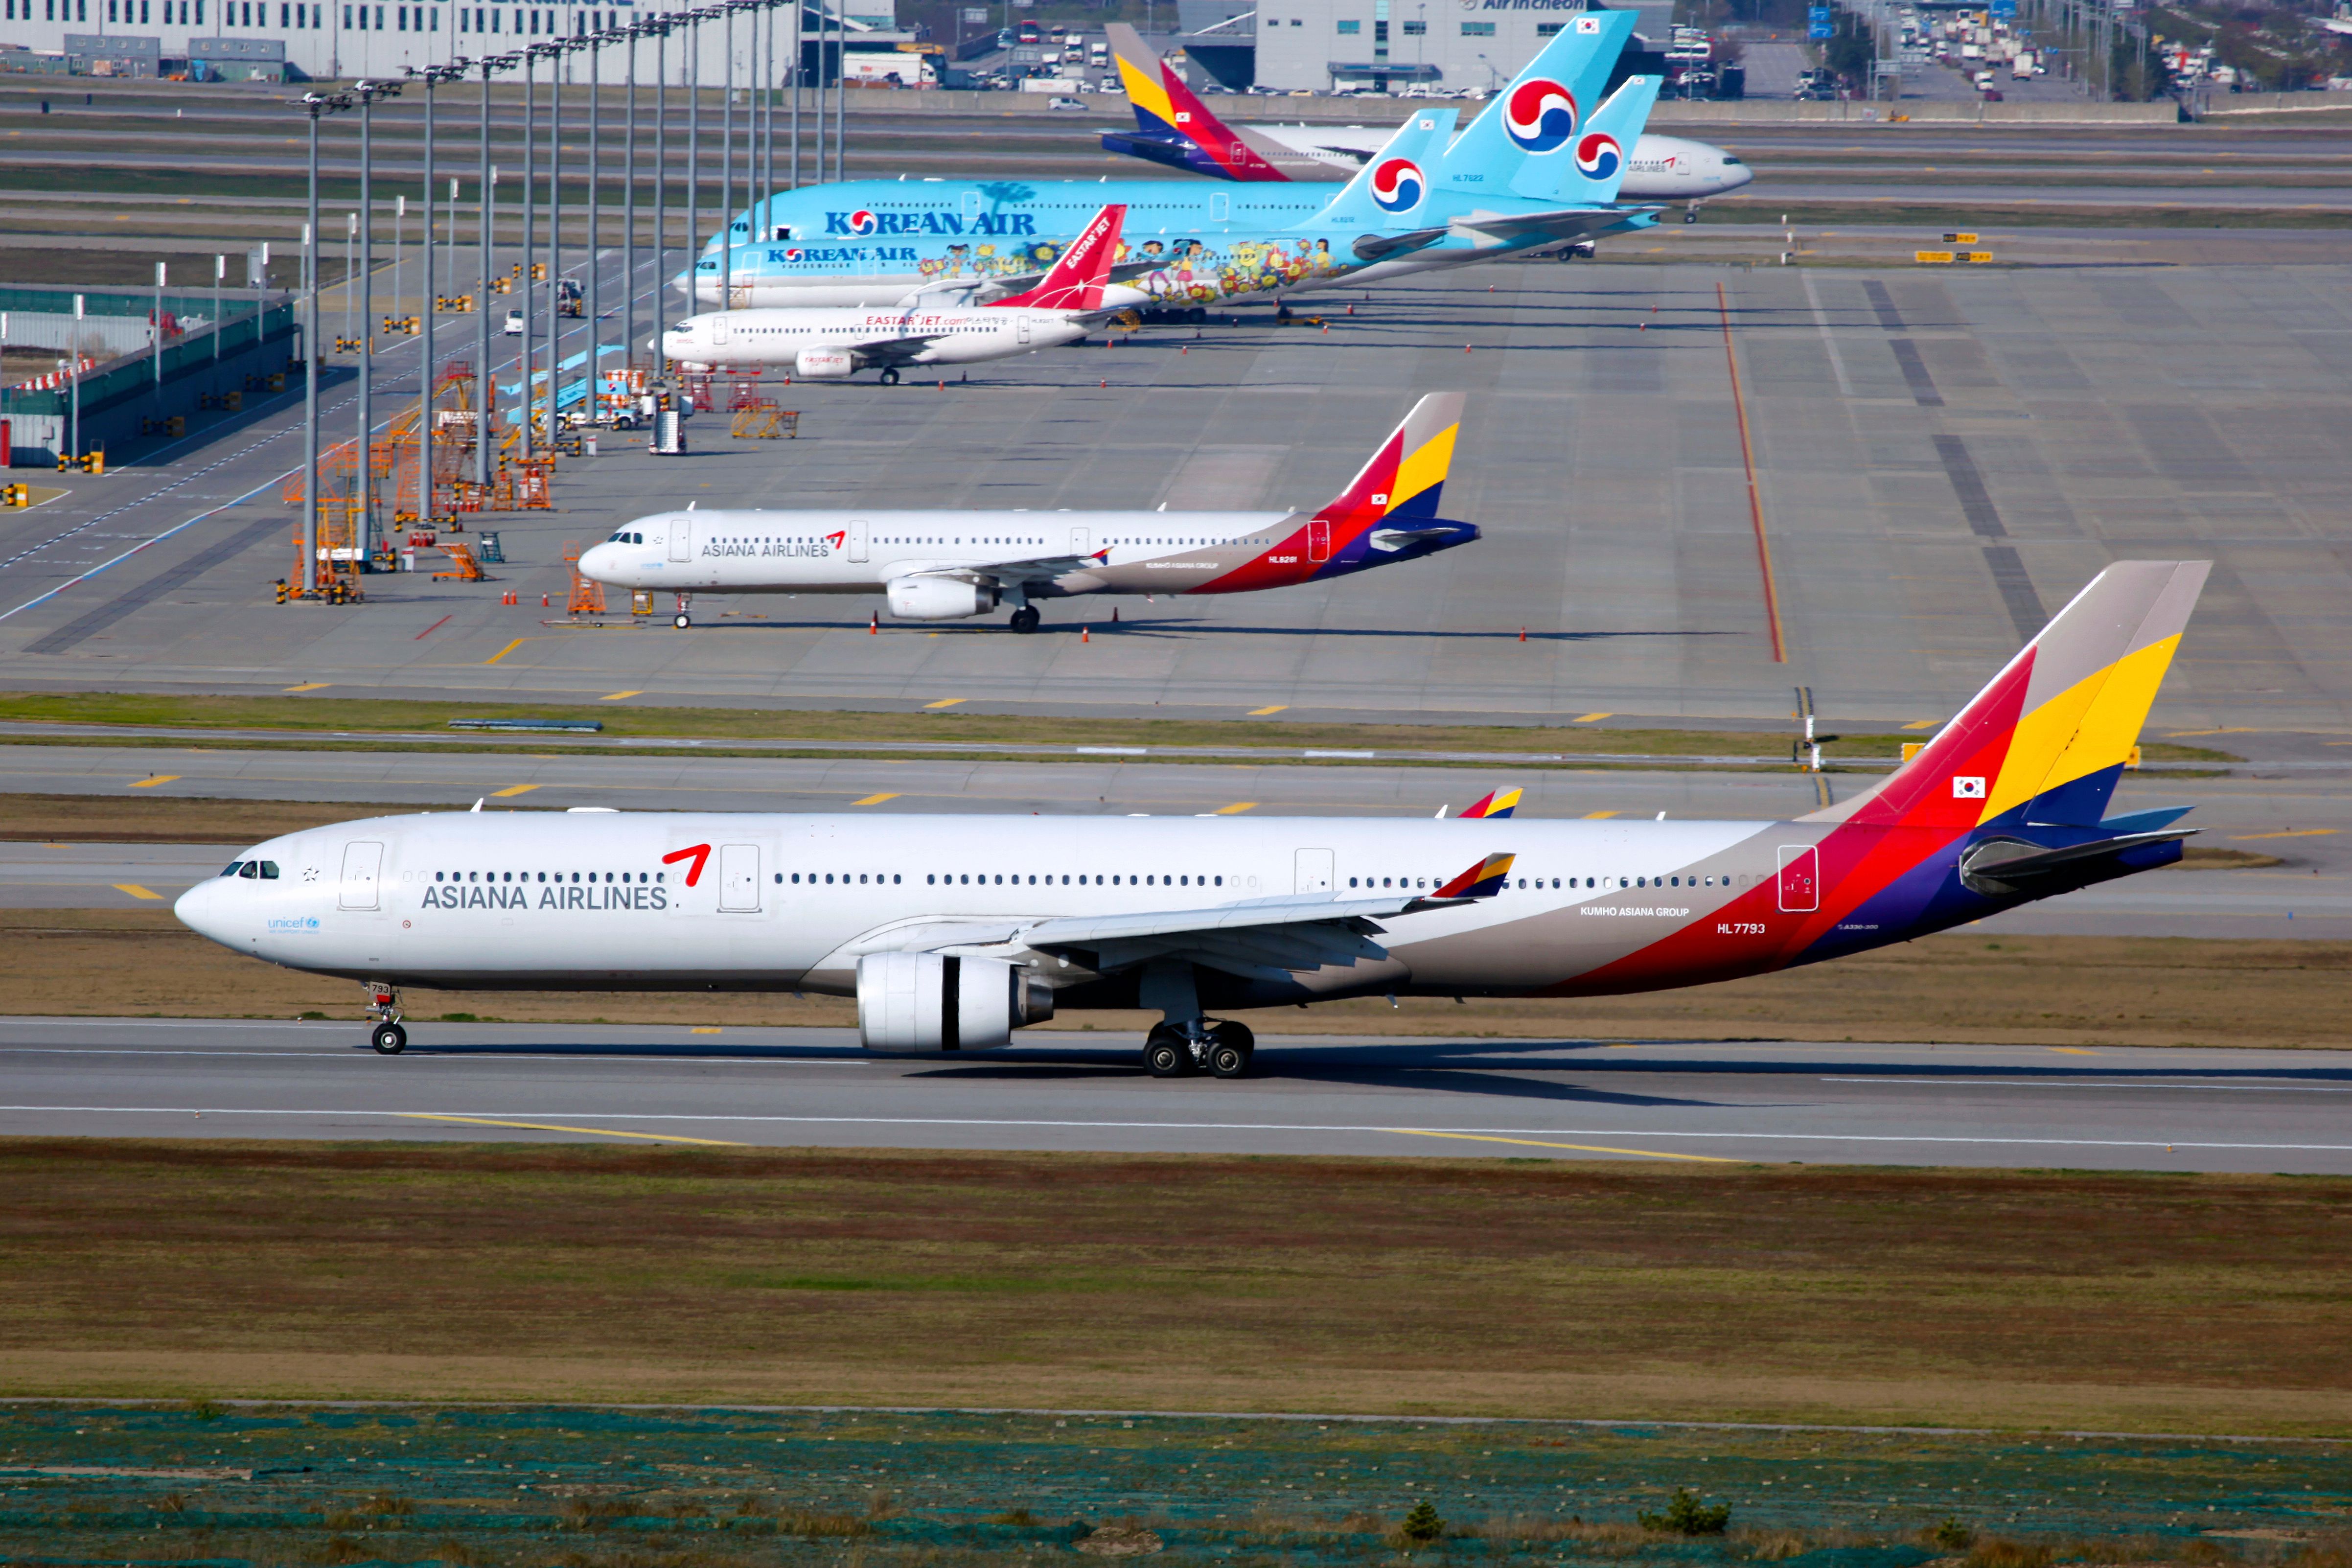 Asiana and Korean Air planes parked